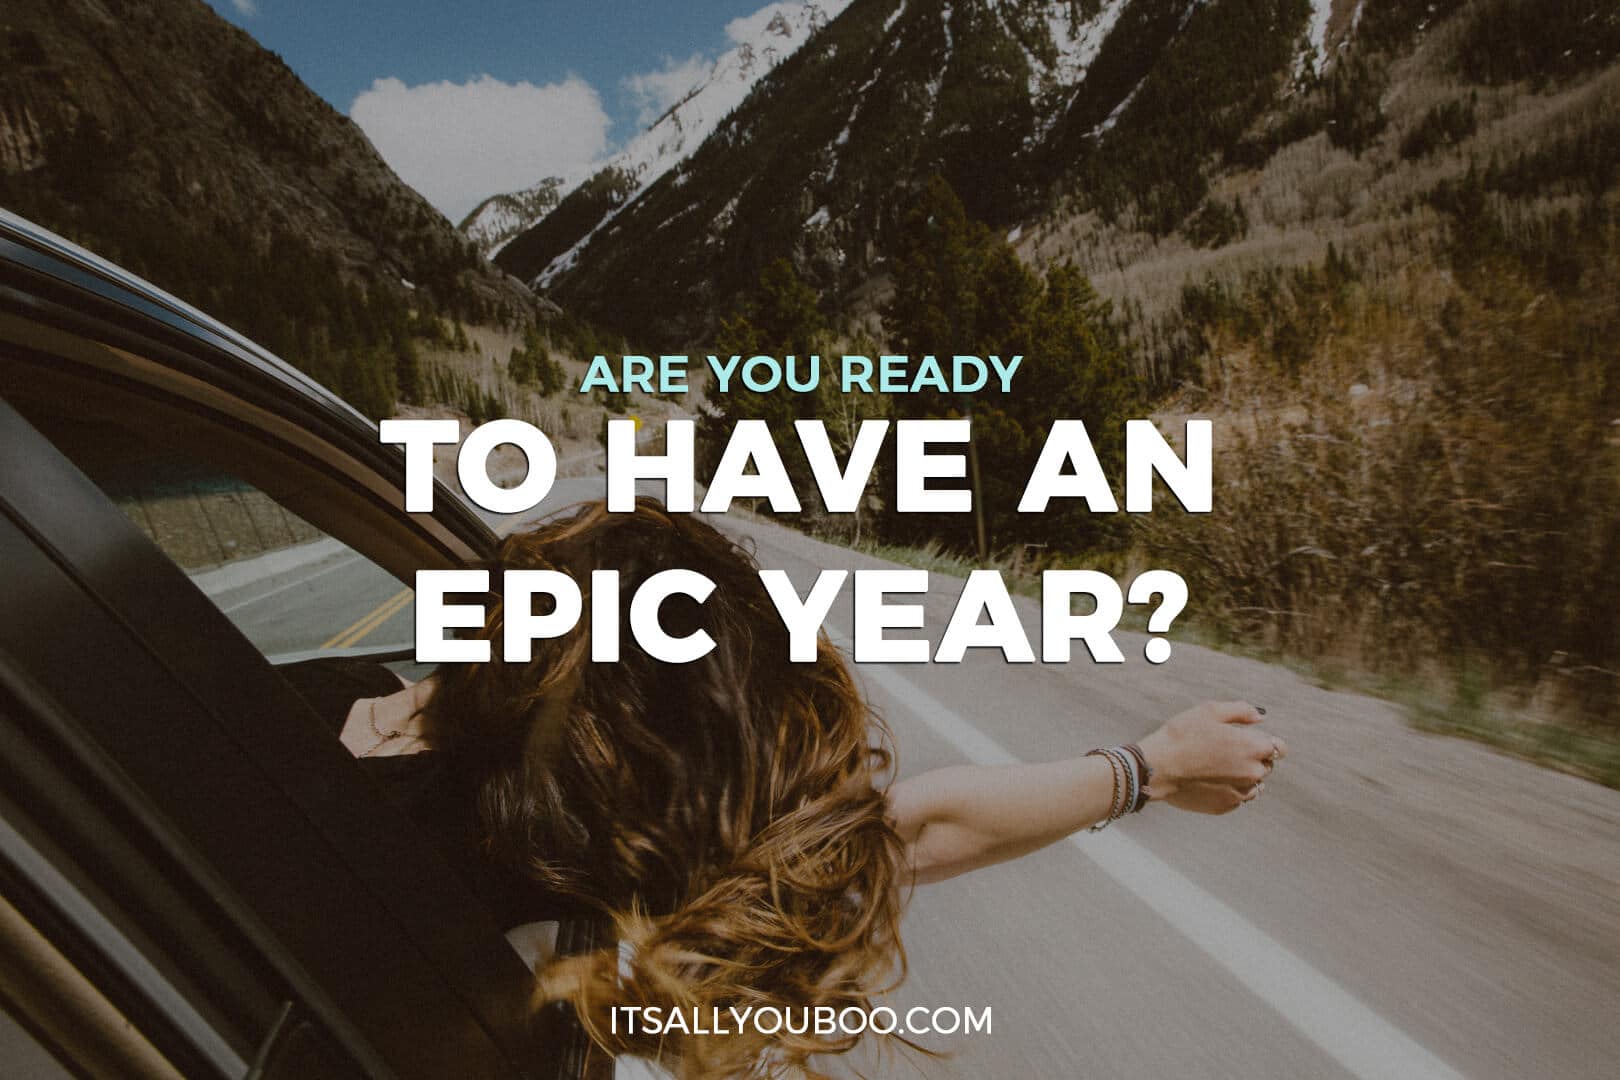 Photo of a woman leaning out of a moving car + Quote: "Are you ready to have an epic year?" - Nadalie Bardo (achieving goals quotes)